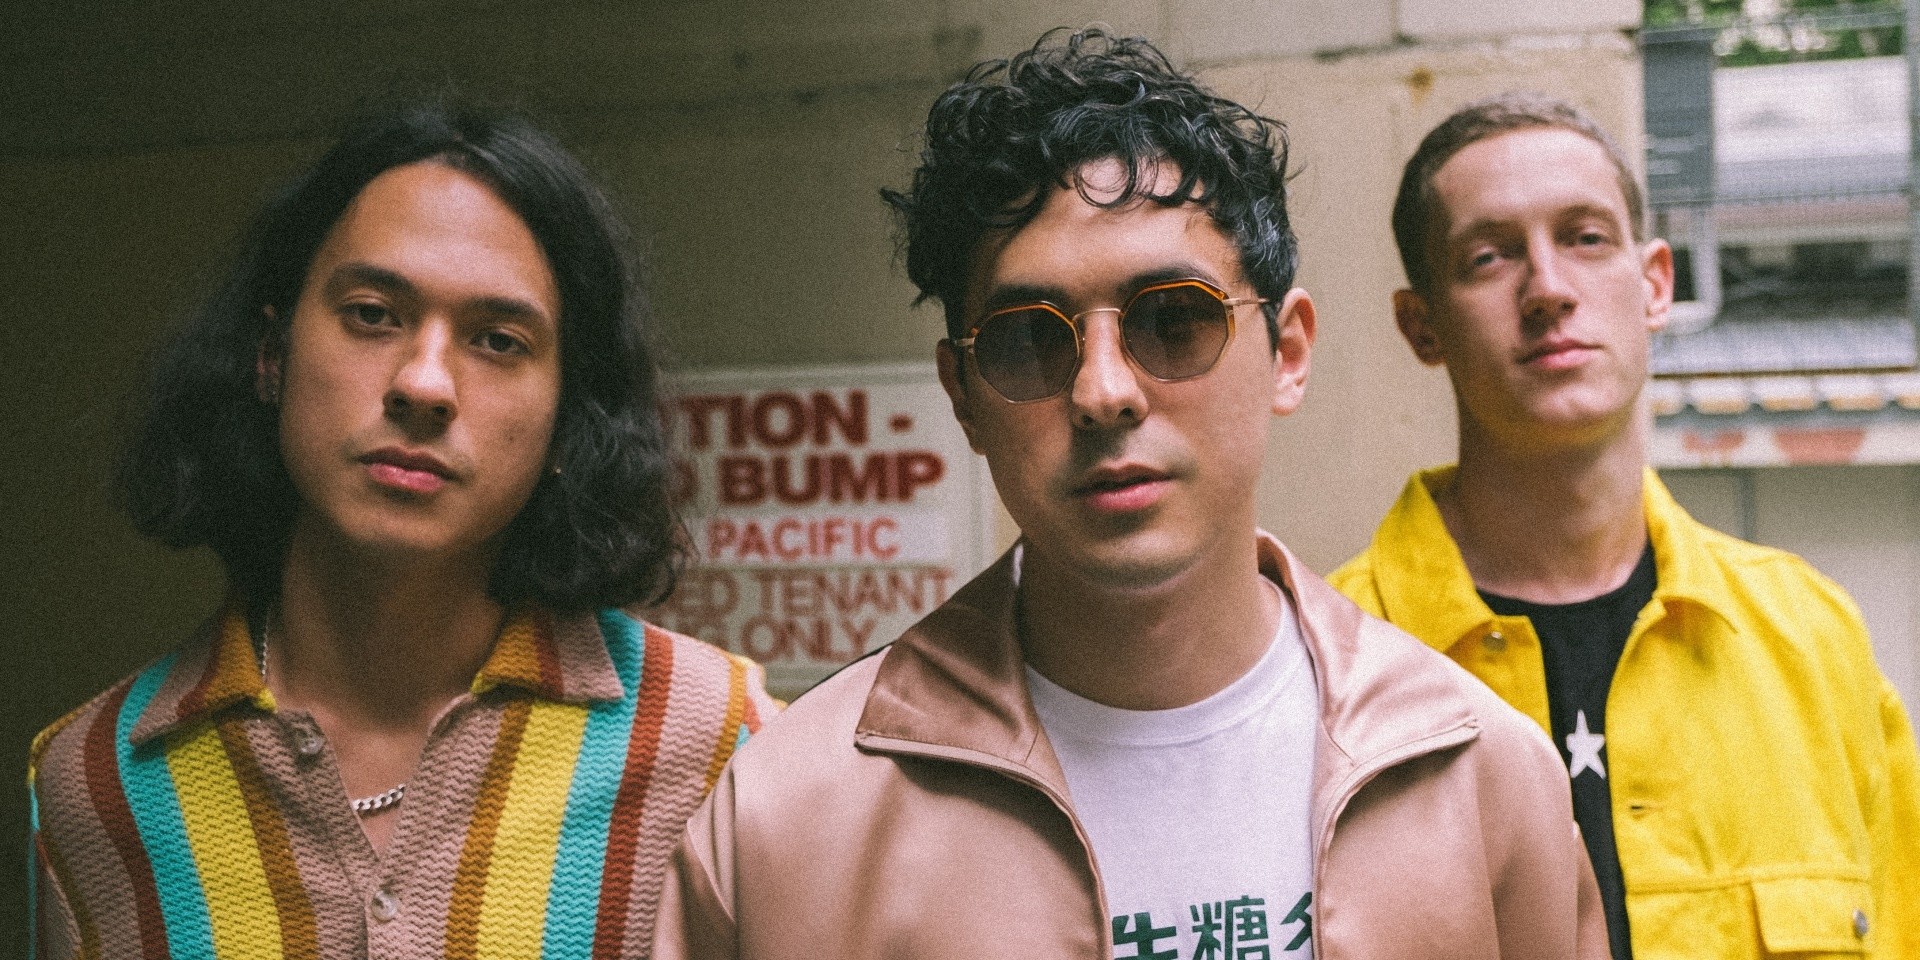 "It's our heart and soul poured into all those melodies and chords": An interview with Sean Caskey of Last Dinosaurs